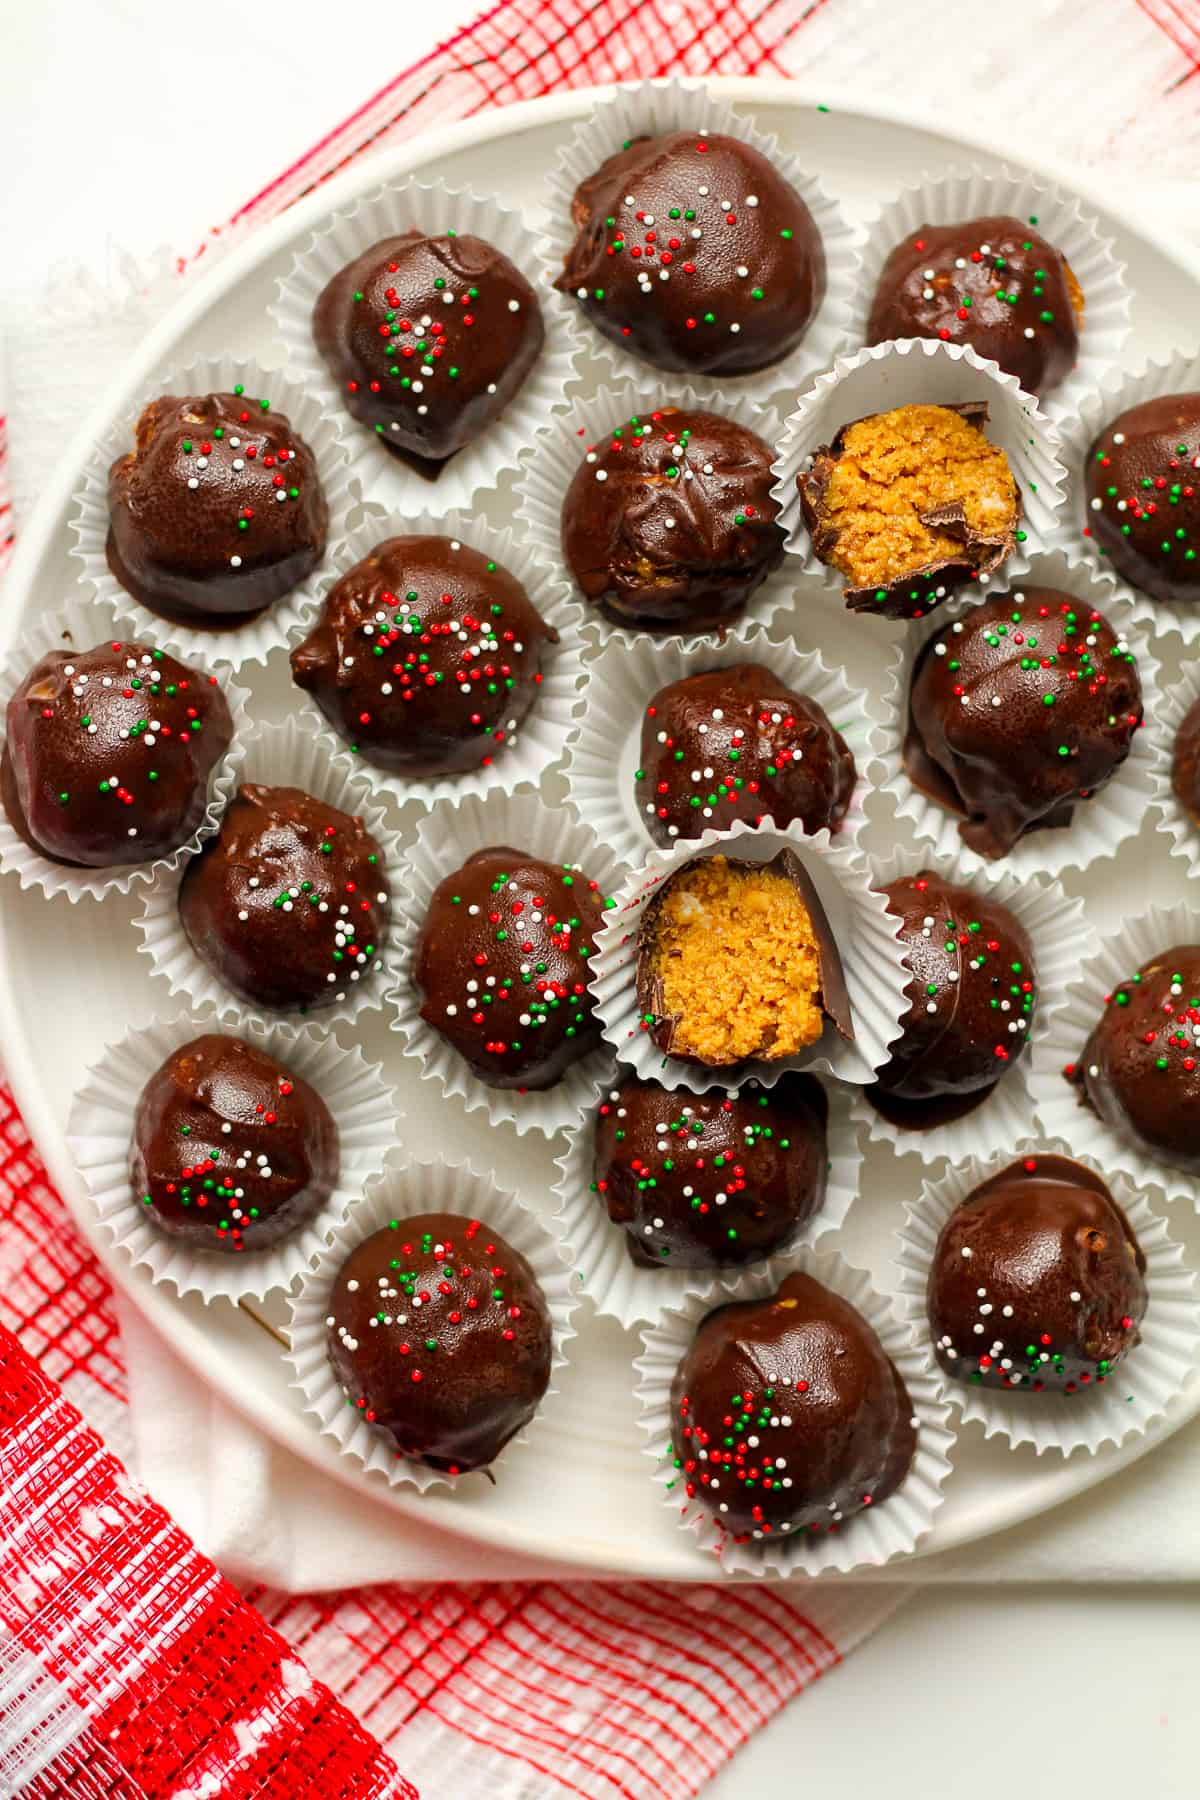 A plate of no bake peanut butter balls with two partial balls.